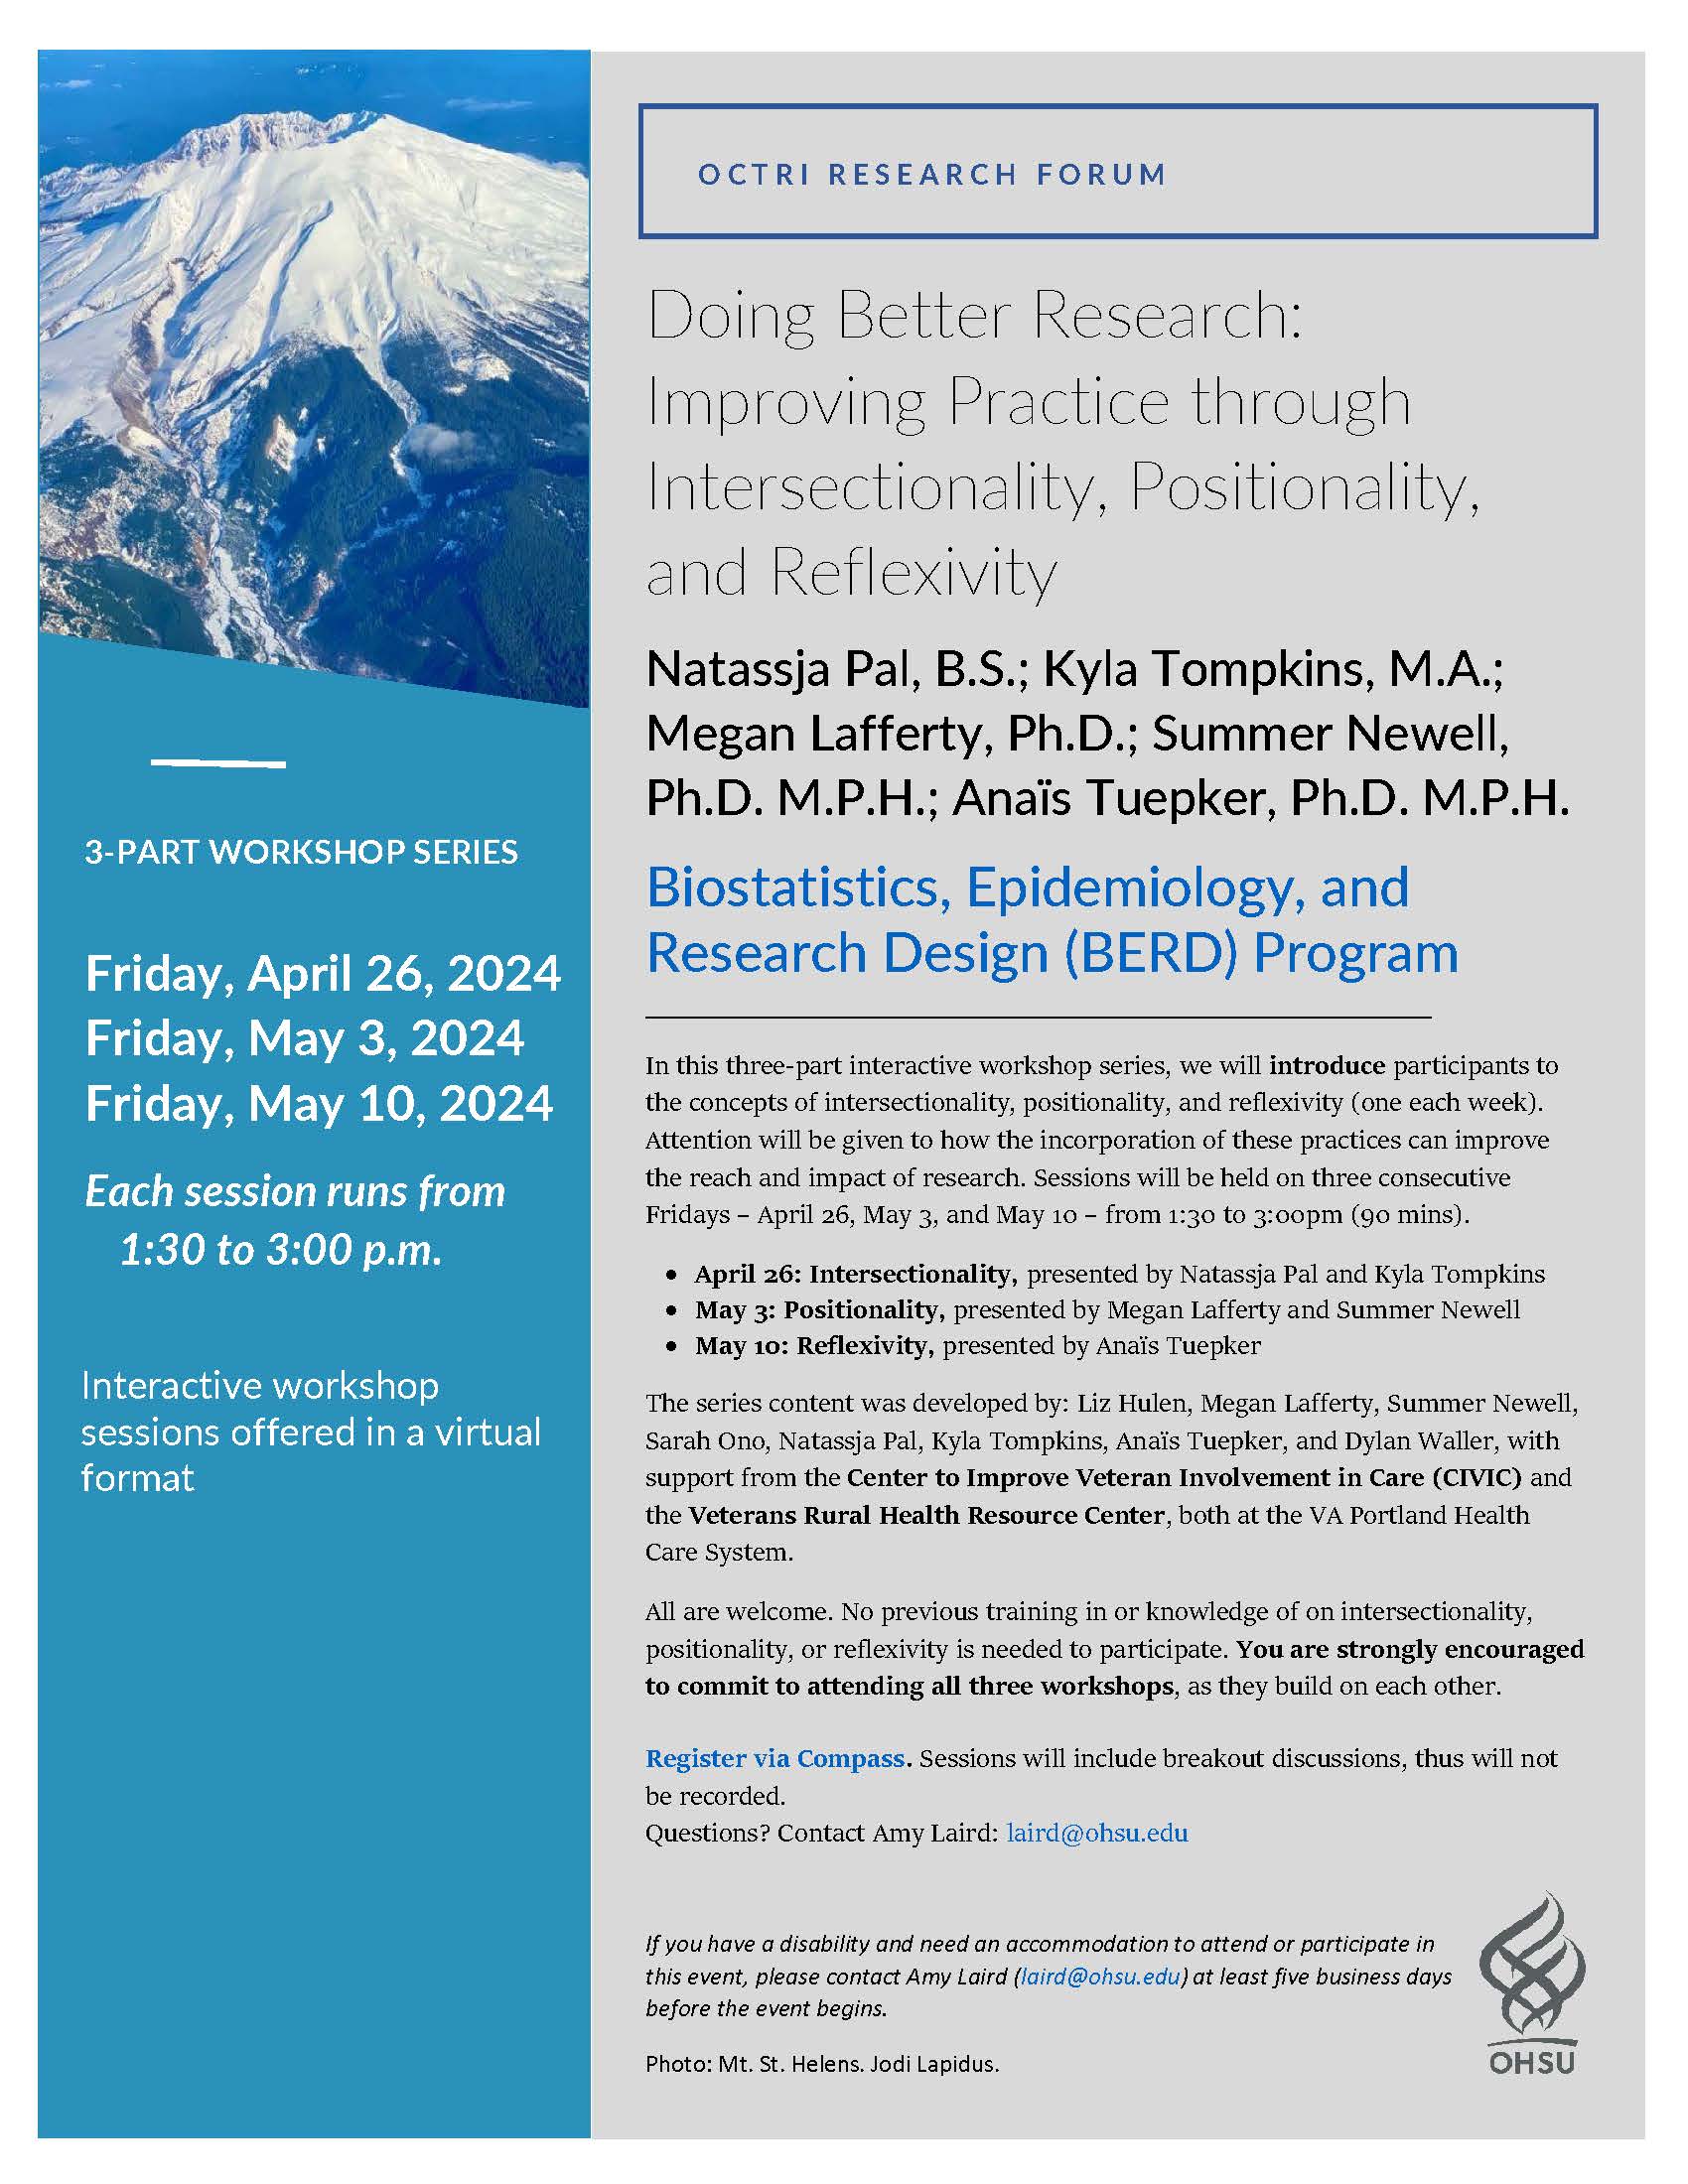 Event flyer for OCTRI Research Forum - Doing Better Research series